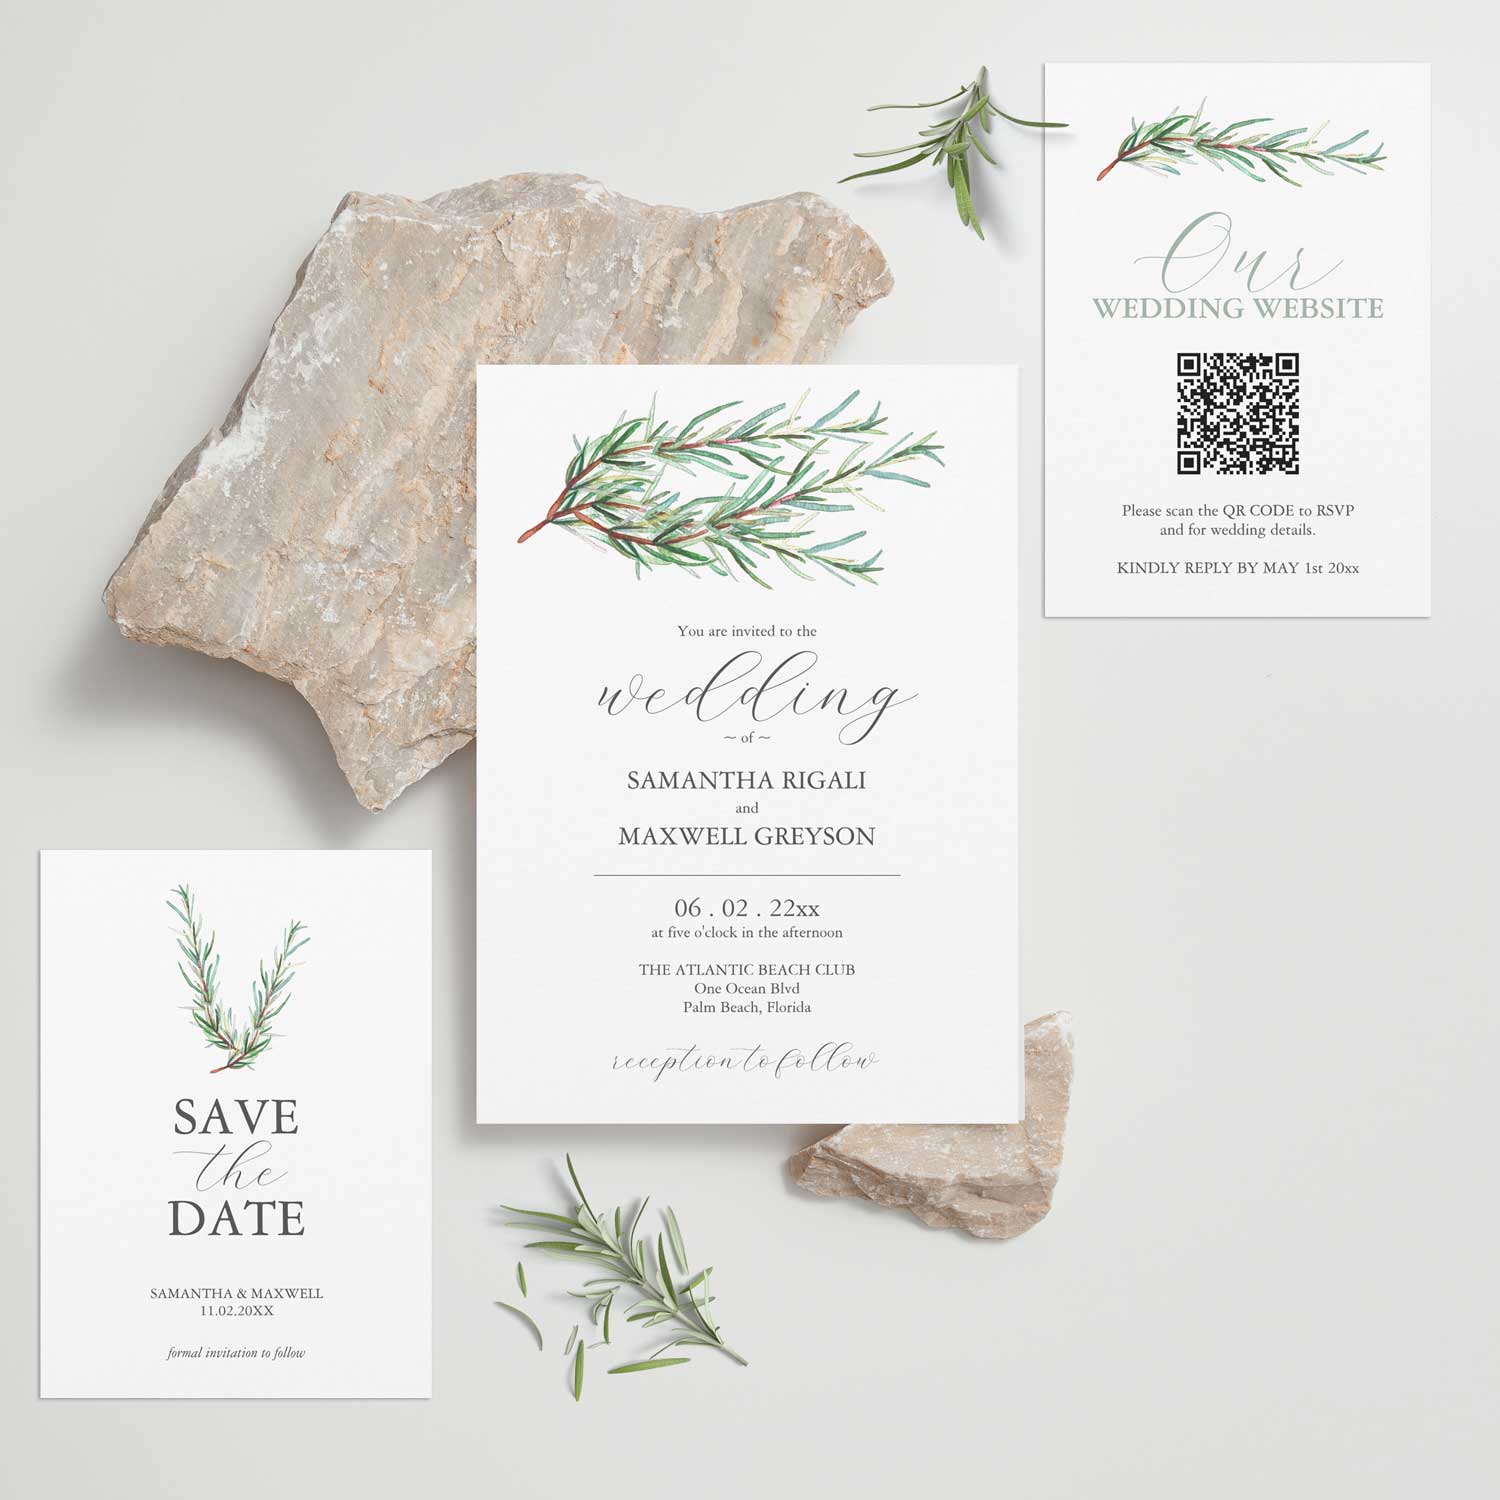 Wedding Invitation Ideas watercolor rosemary art and design by Victoria Grigaliunas of Do Tell A Belle